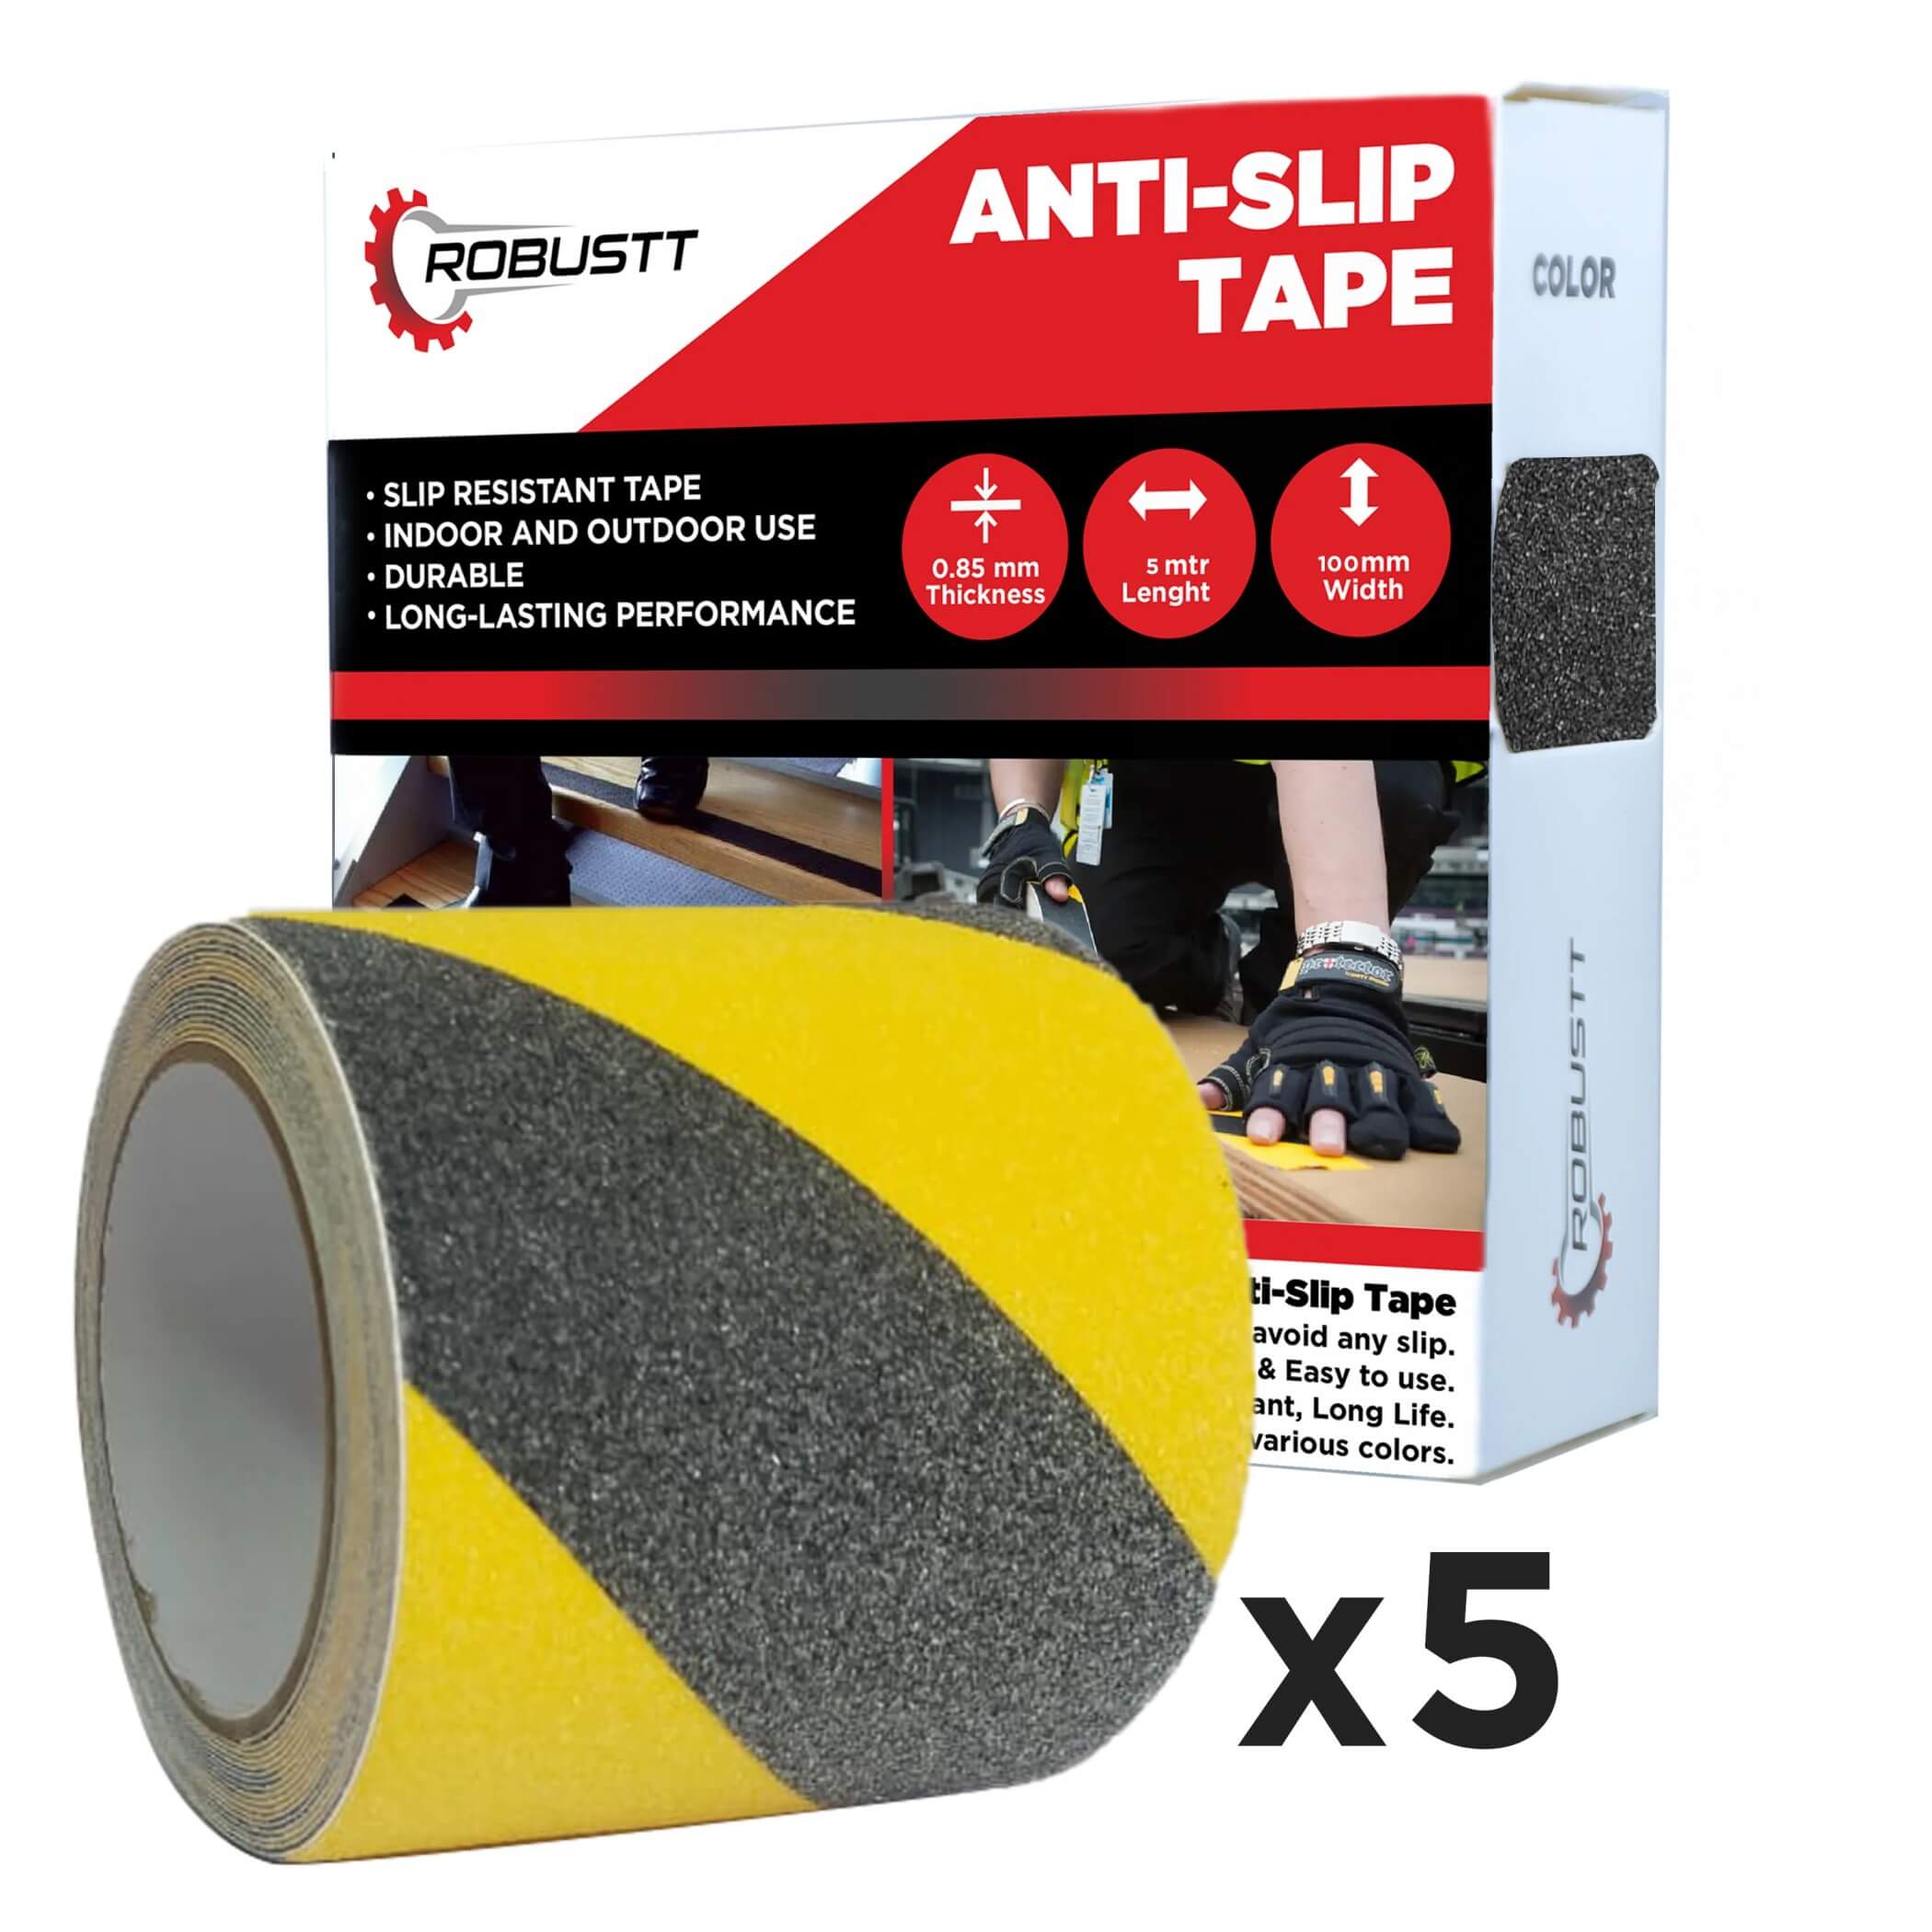 robustt-anti-skid-antislip-5mtr-guaranteed-x100mm-yellow-black-fall-resistant-with-pet-material-and-solvent-acrylic-adhesive-tape-pack-of-5